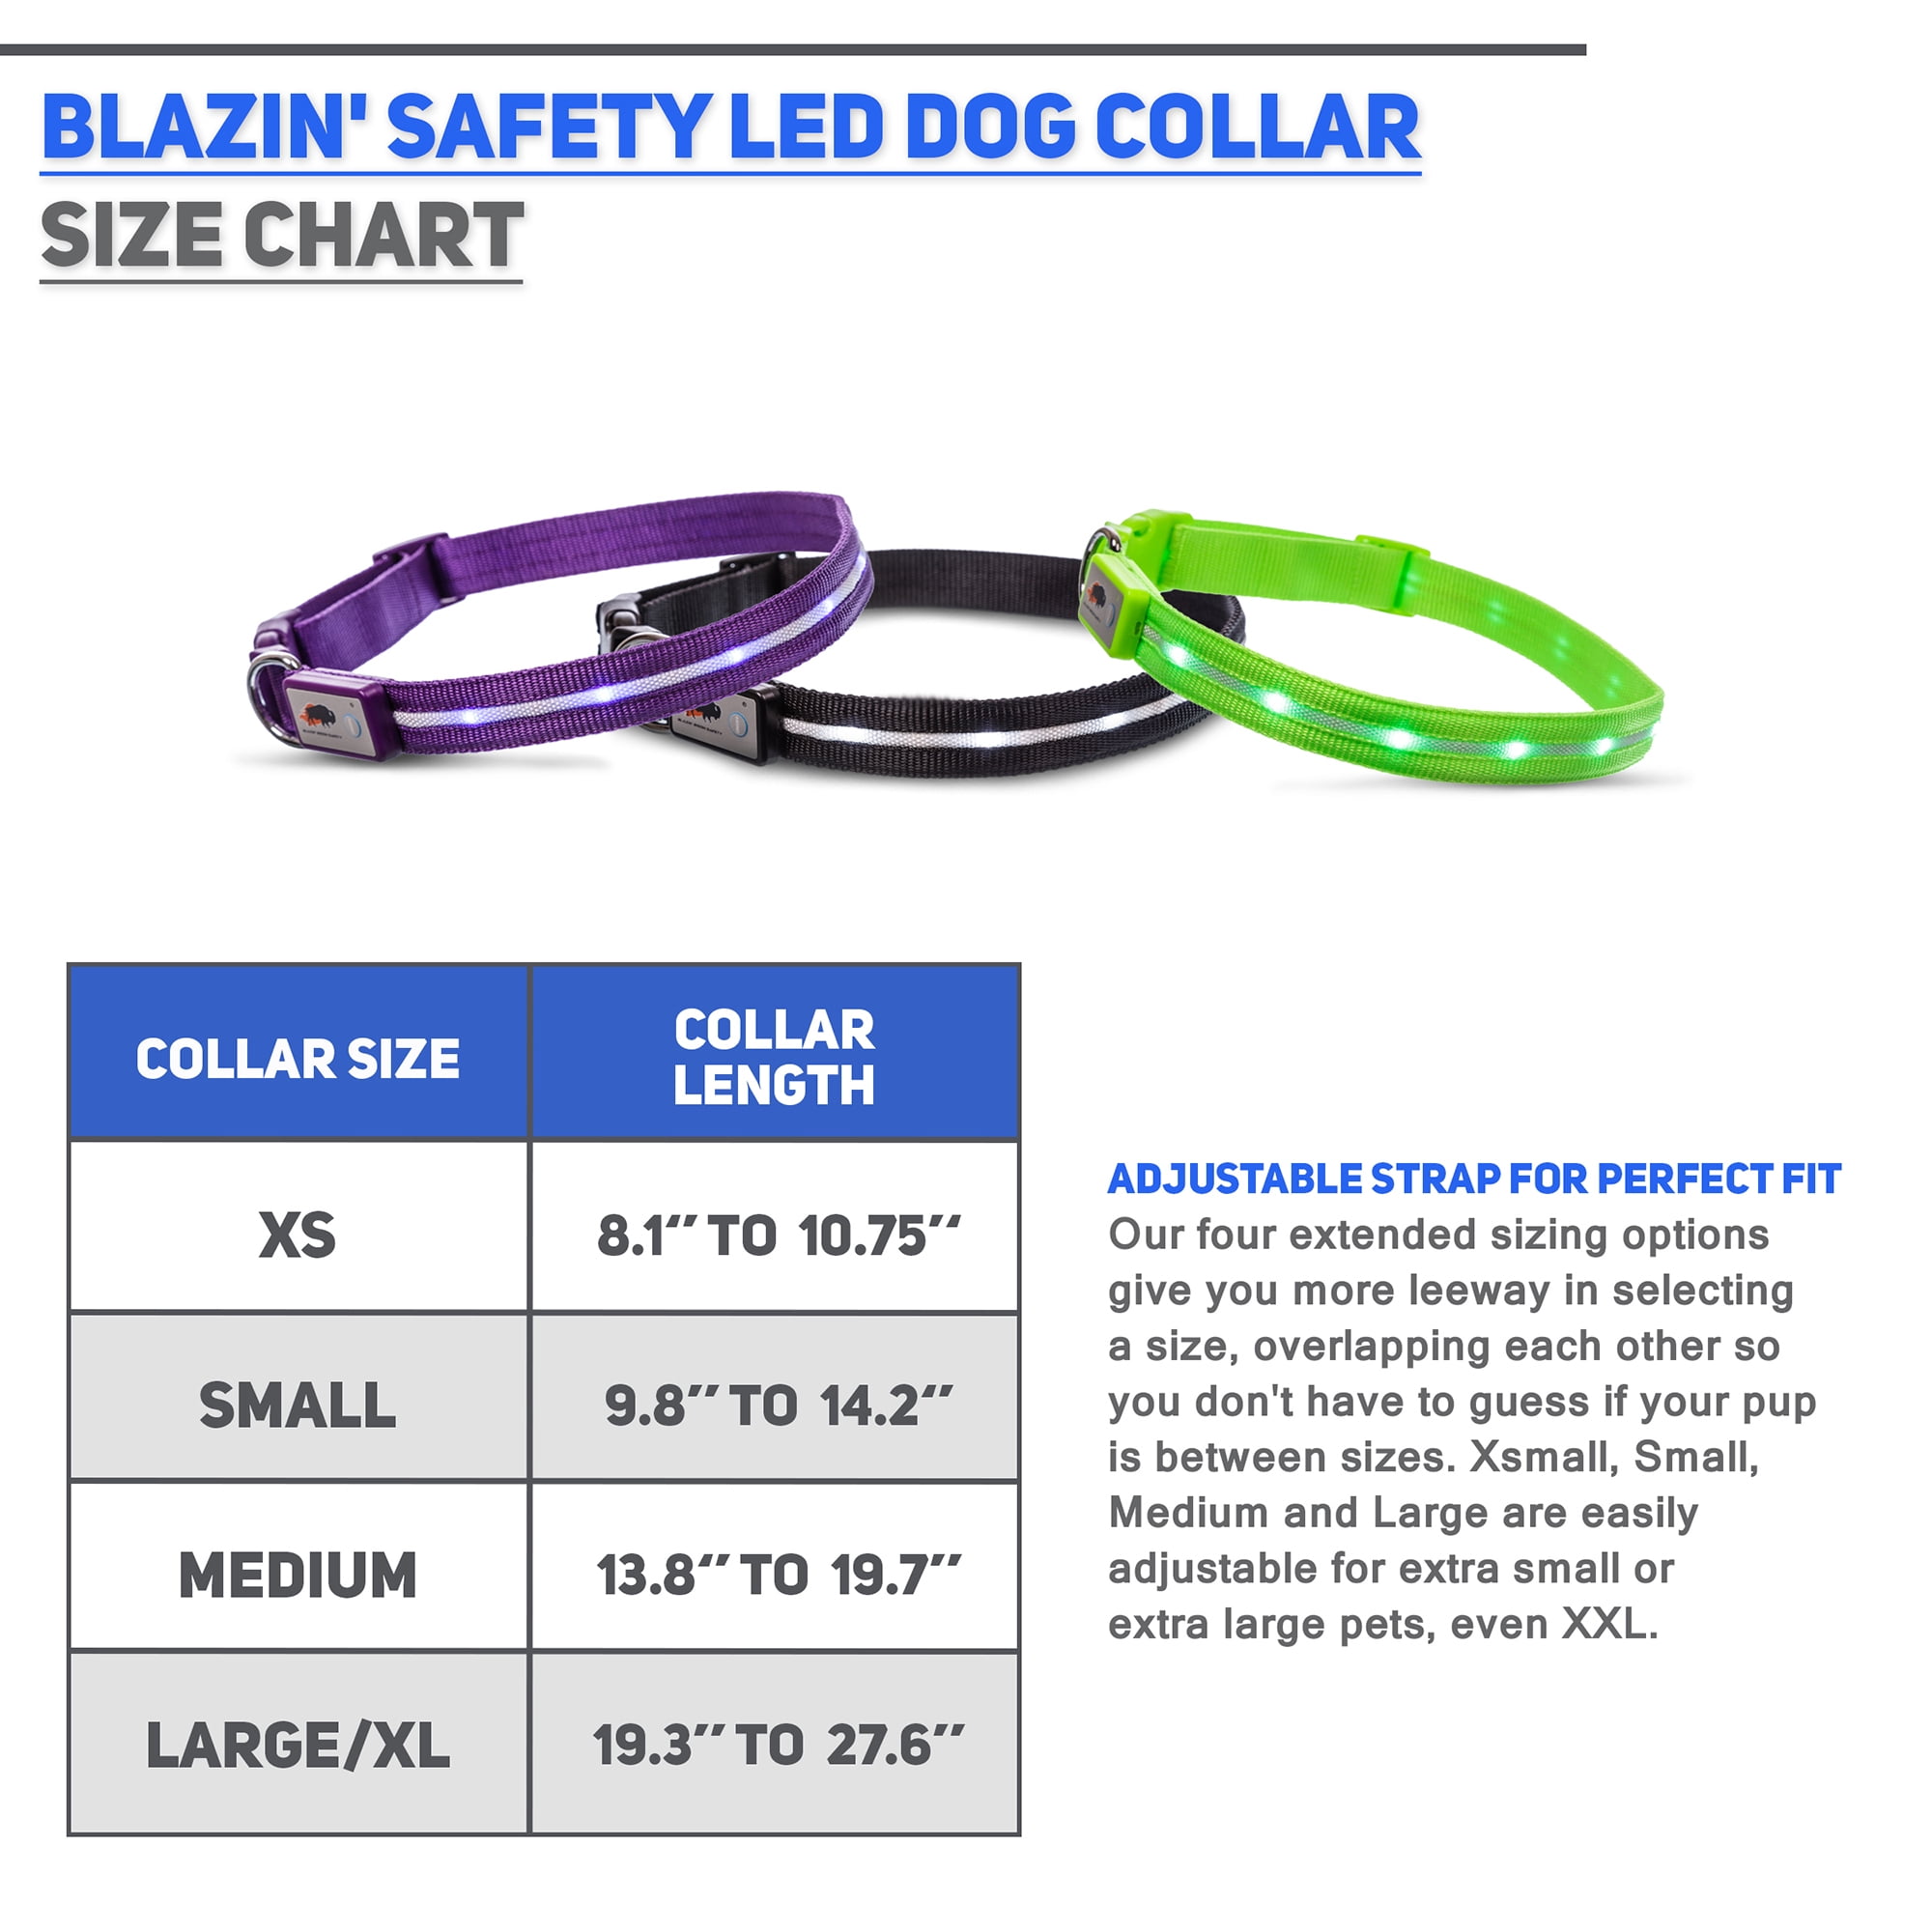 USB Rechargeable with Water Resistant Flashing Light Blazin Safety LED Dog Collar 